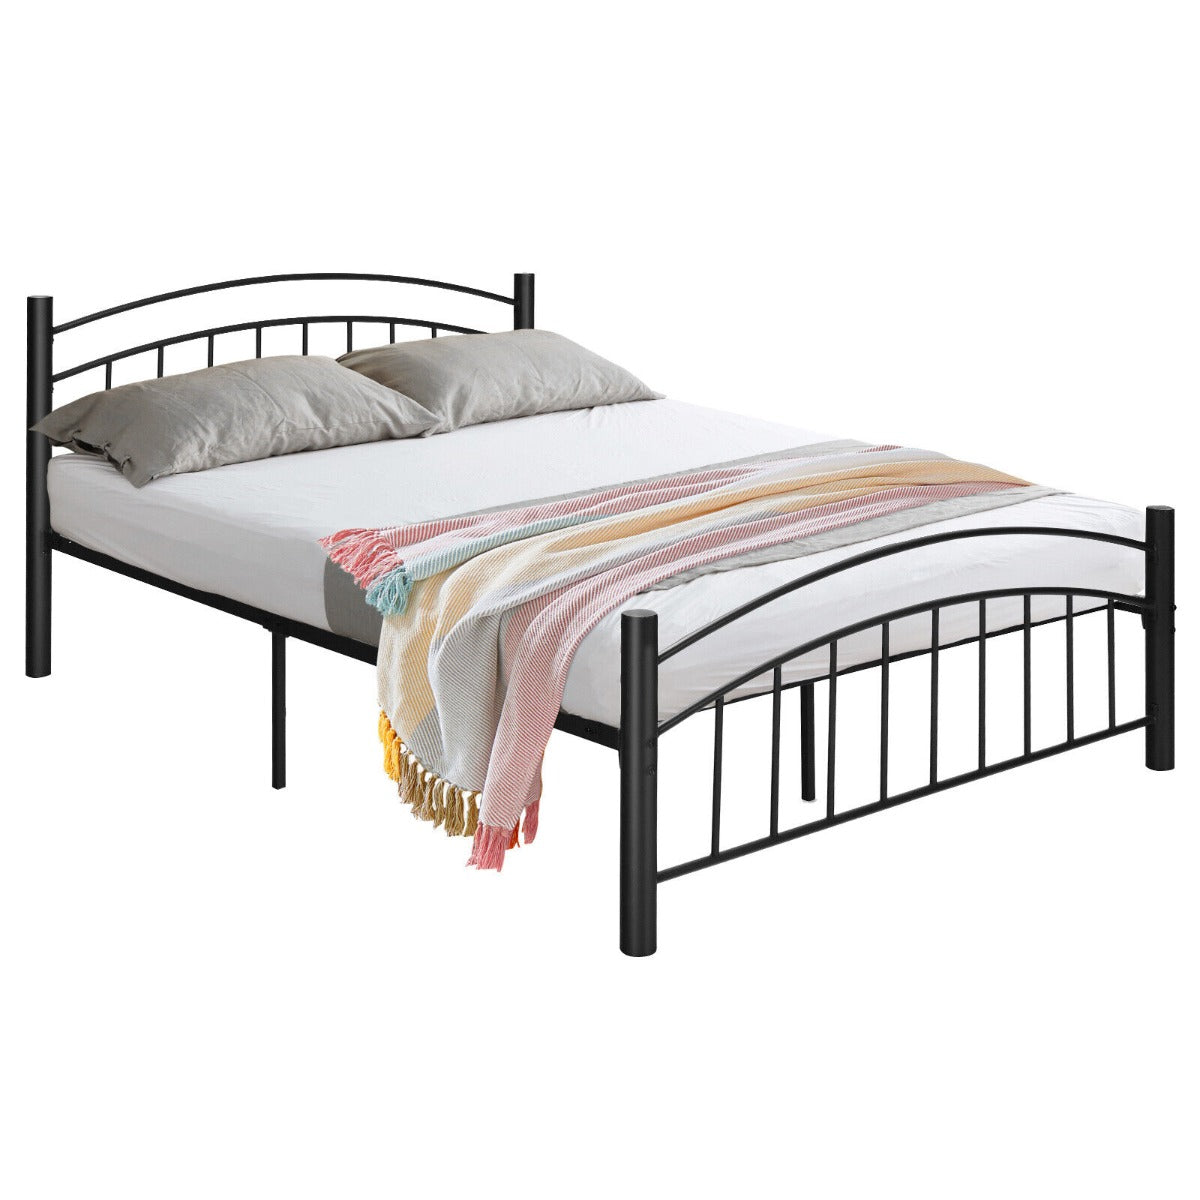 Metal Bed Frame Platform Bed with Headboard for Bedroom-Twin size